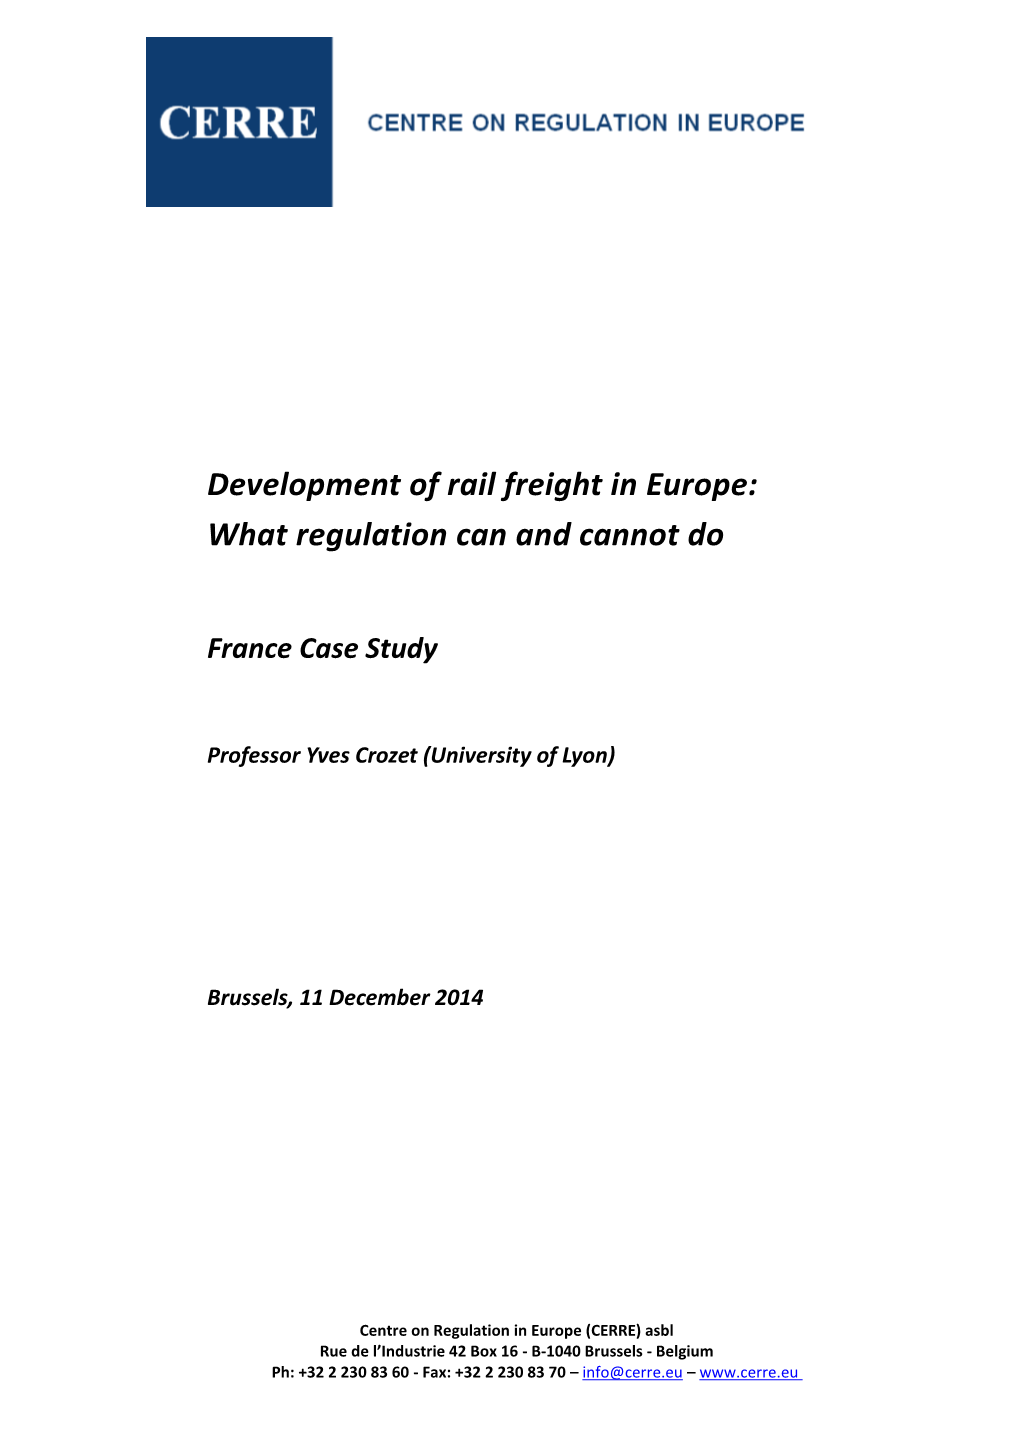 Development of Rail Freight in Europe: What Regulation Can and Cannot Do